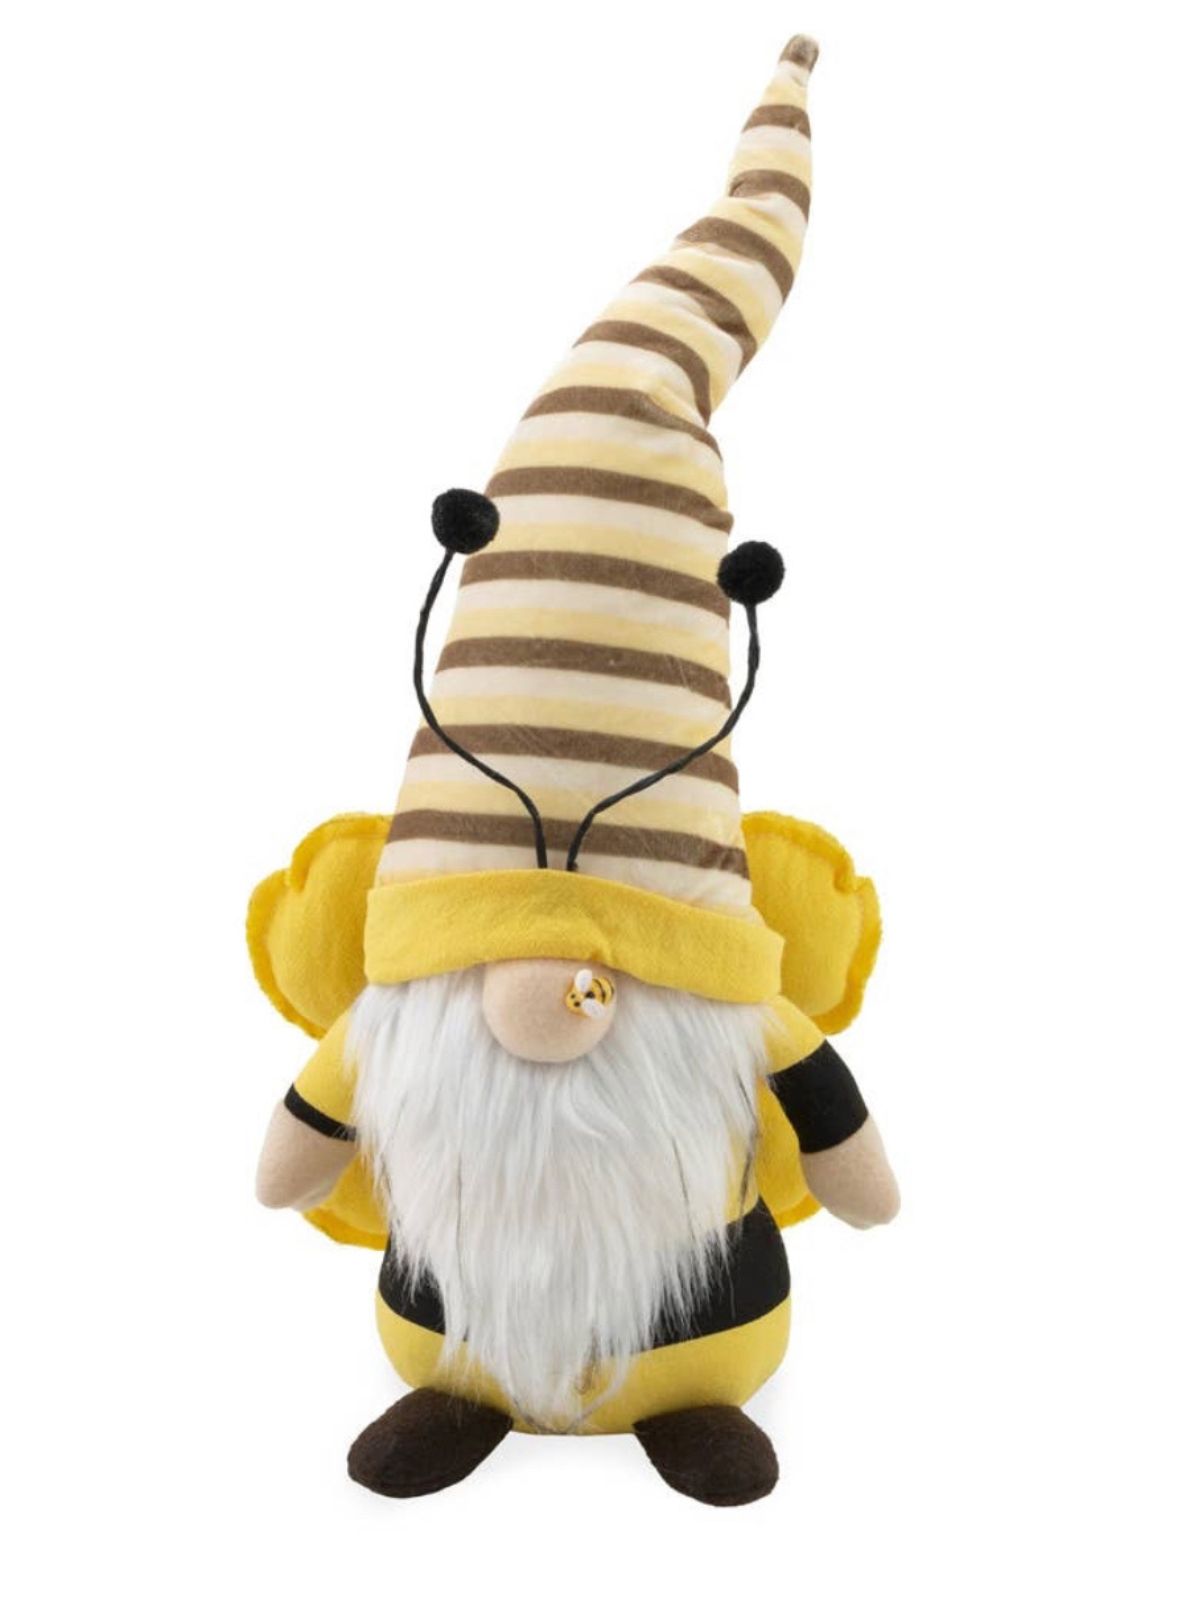 The Buzzy Bertel Bee Gnome will be a perfect Home Accent. Home Decoration items are the best way to ensure that you can inject your personality into your home and make everything look like a reflection of who you are.